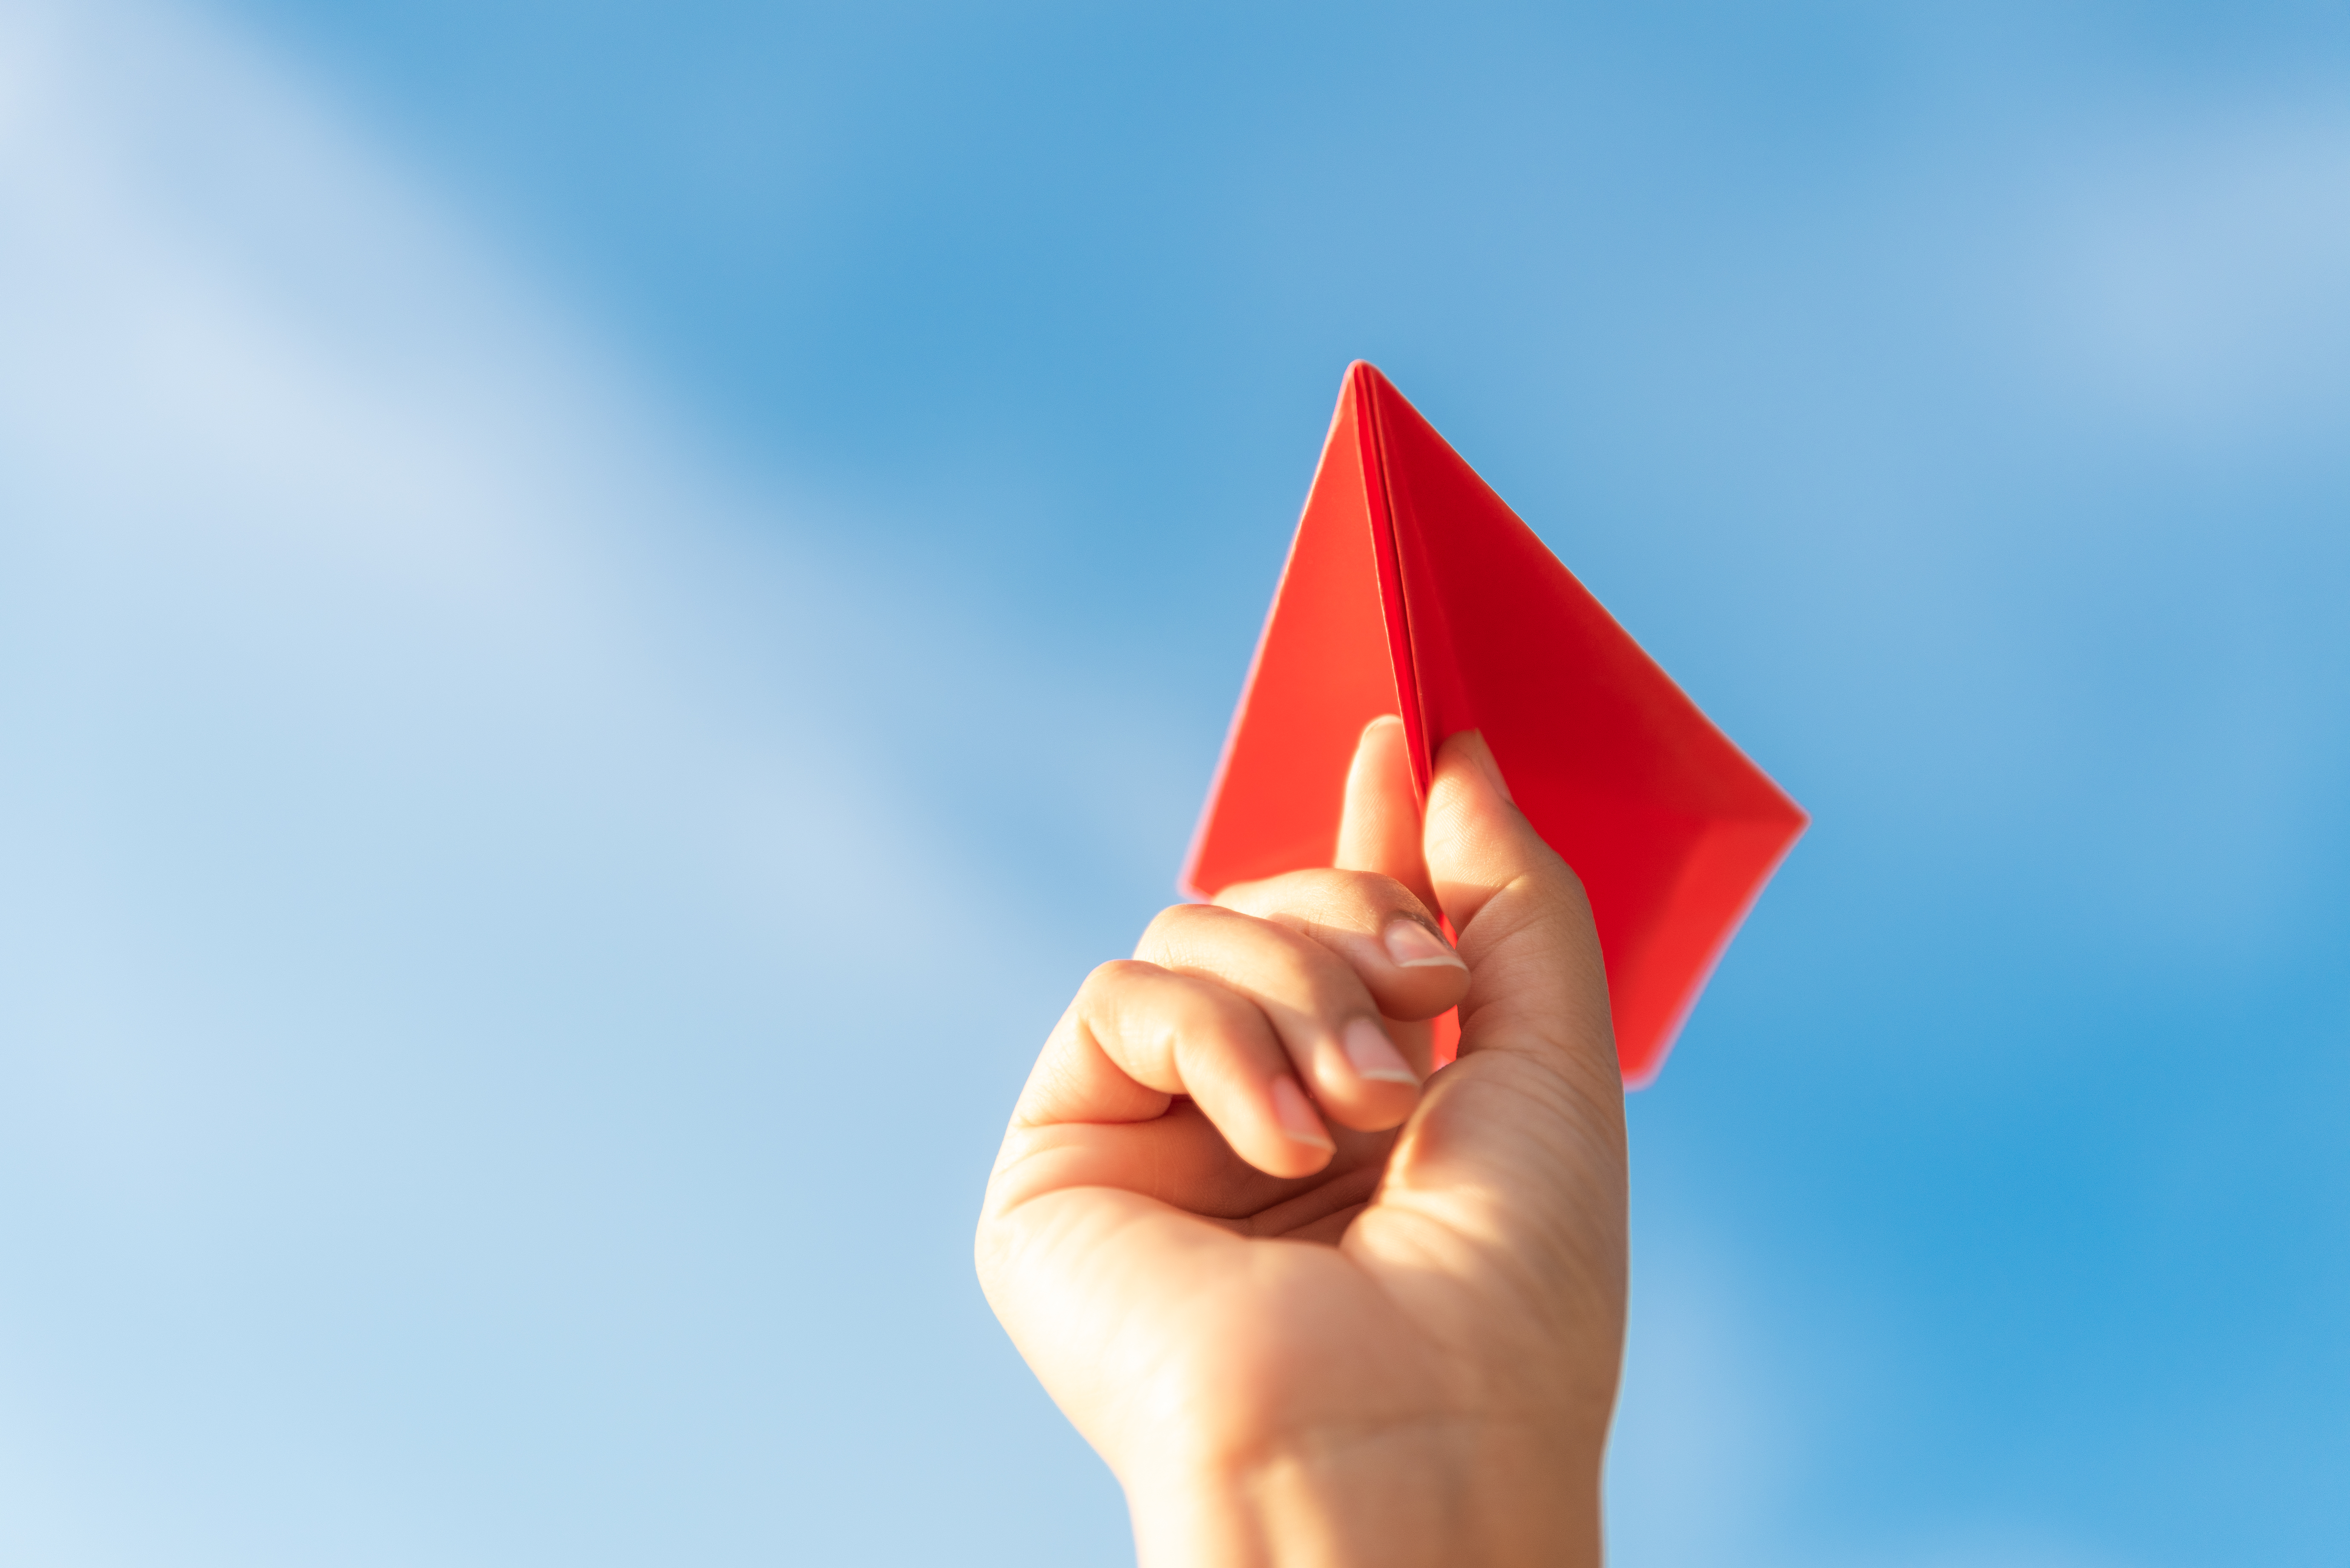 Hand holding a red paper airplane against a blue sky with wispy clouds.